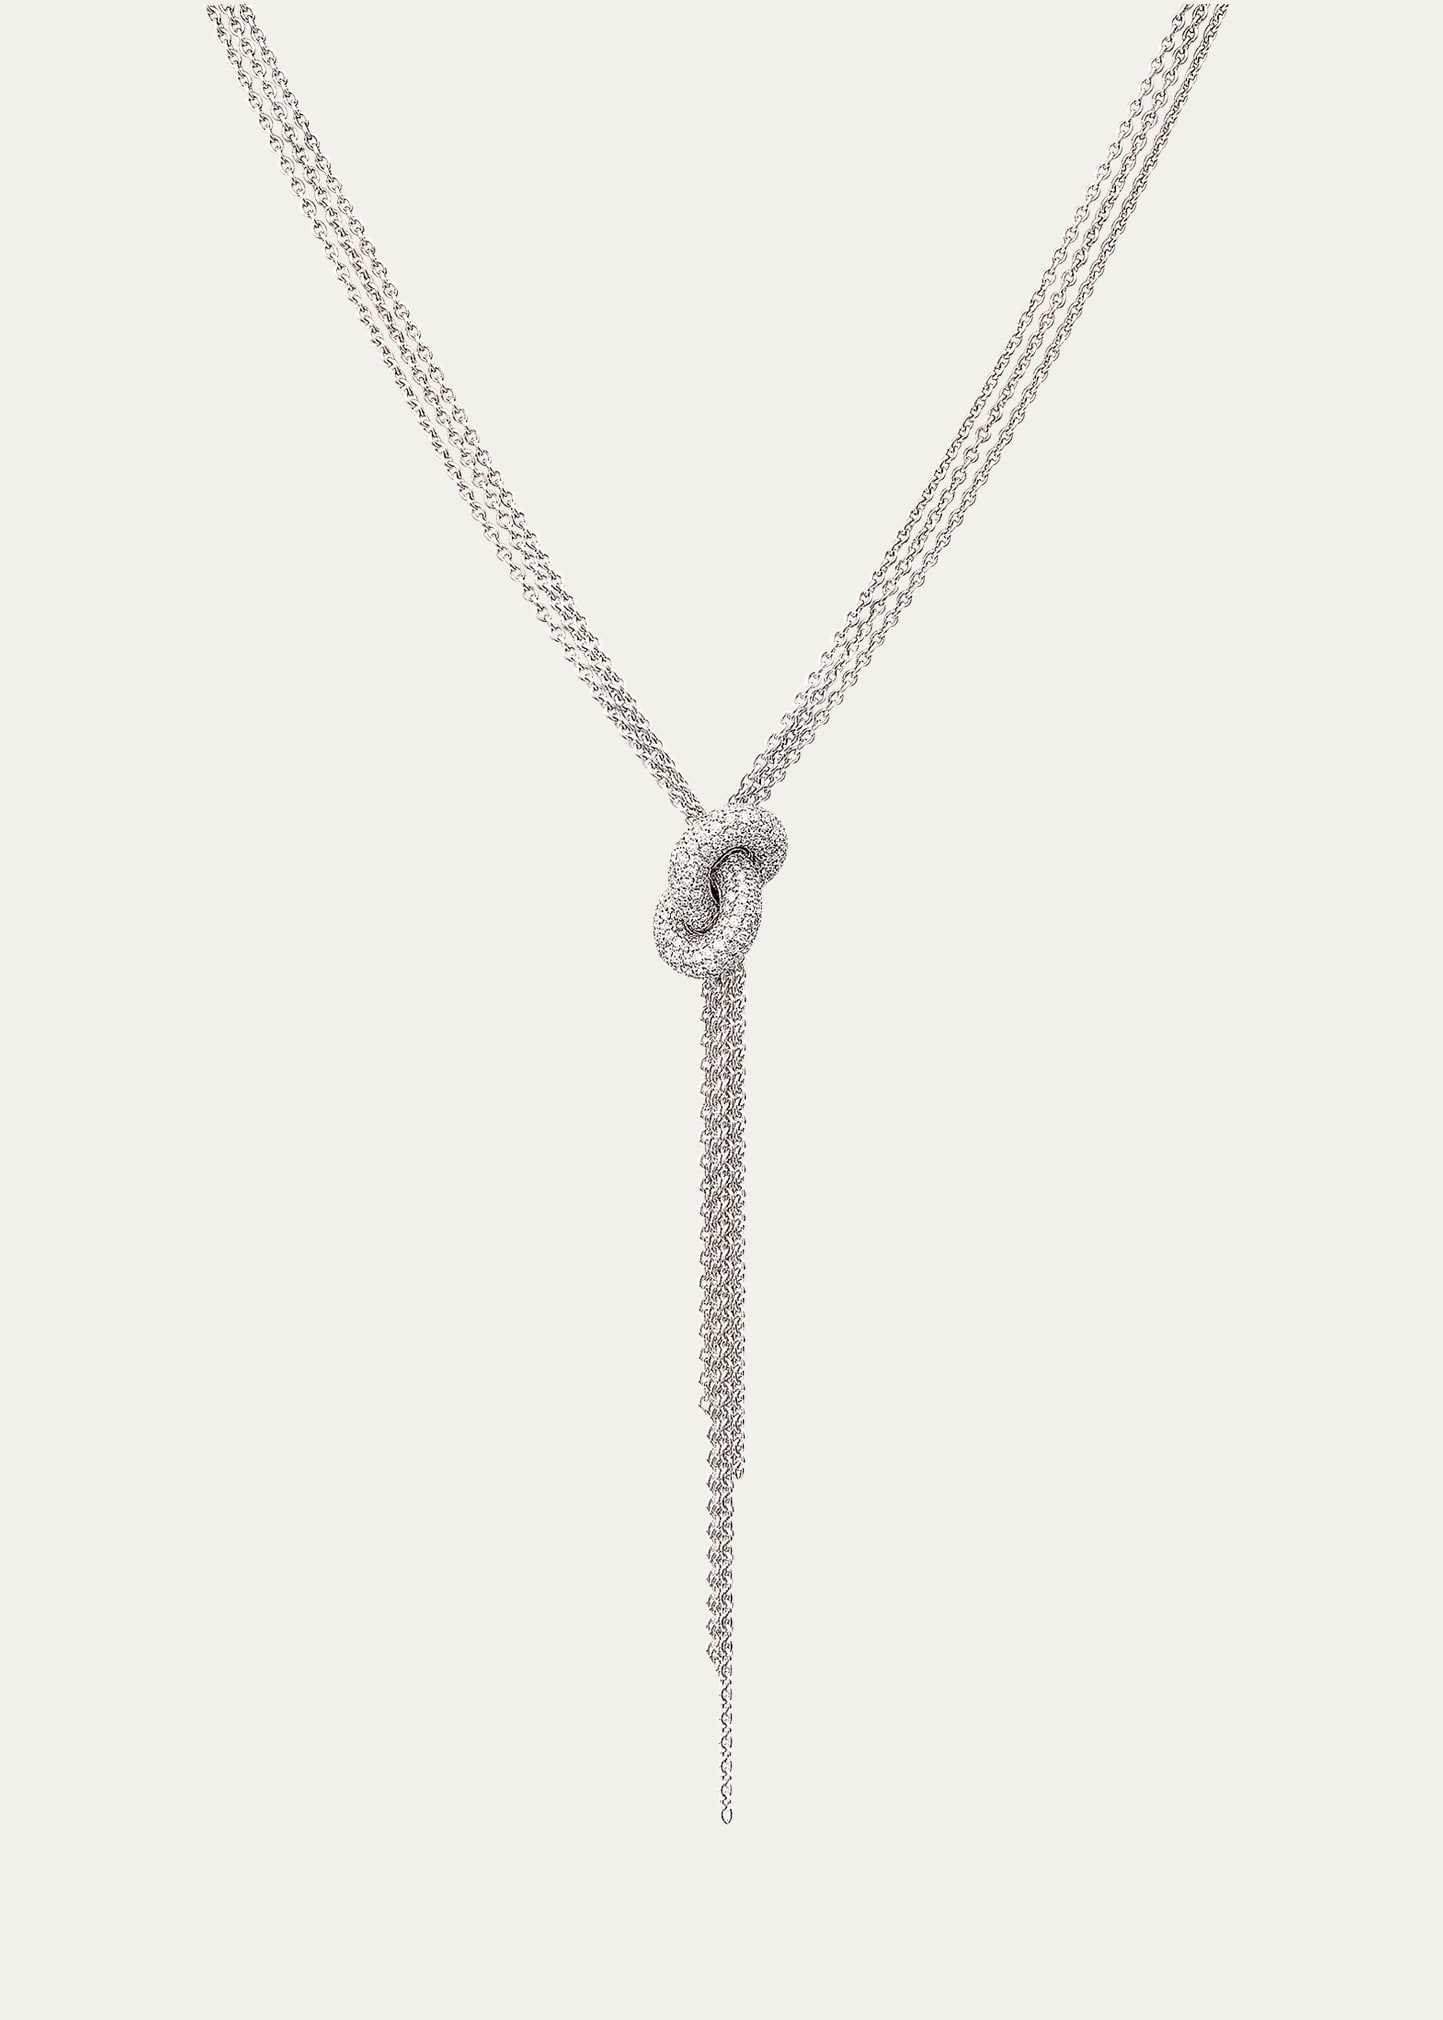 The Legacy Knot Necklace in White Gold and White Diamonds